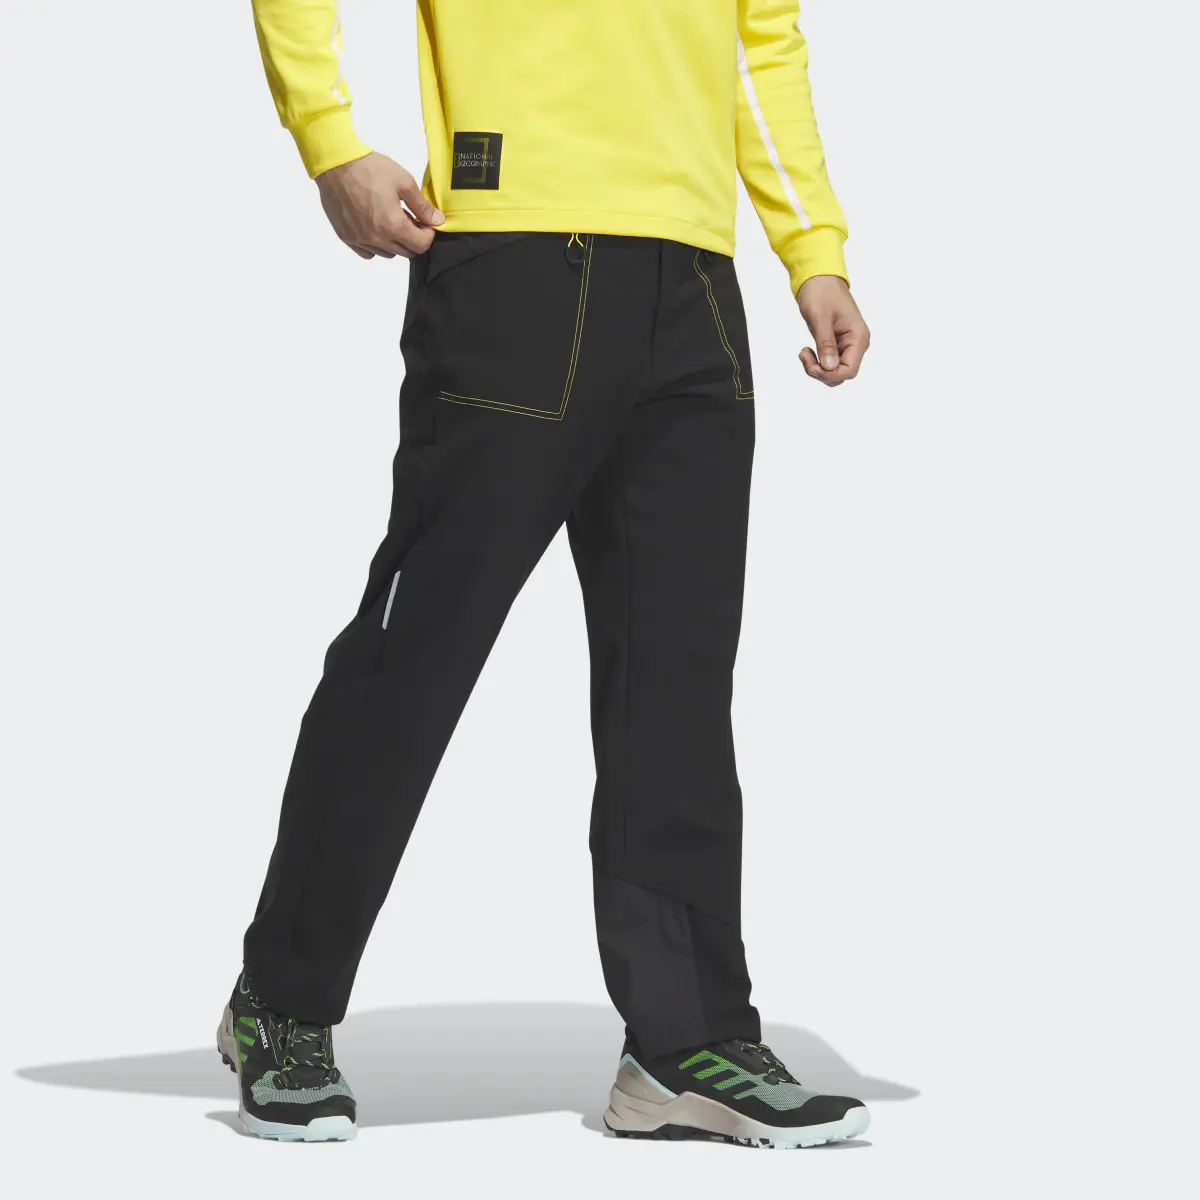 Adidas Pants National Geographic Soft Shell. 3